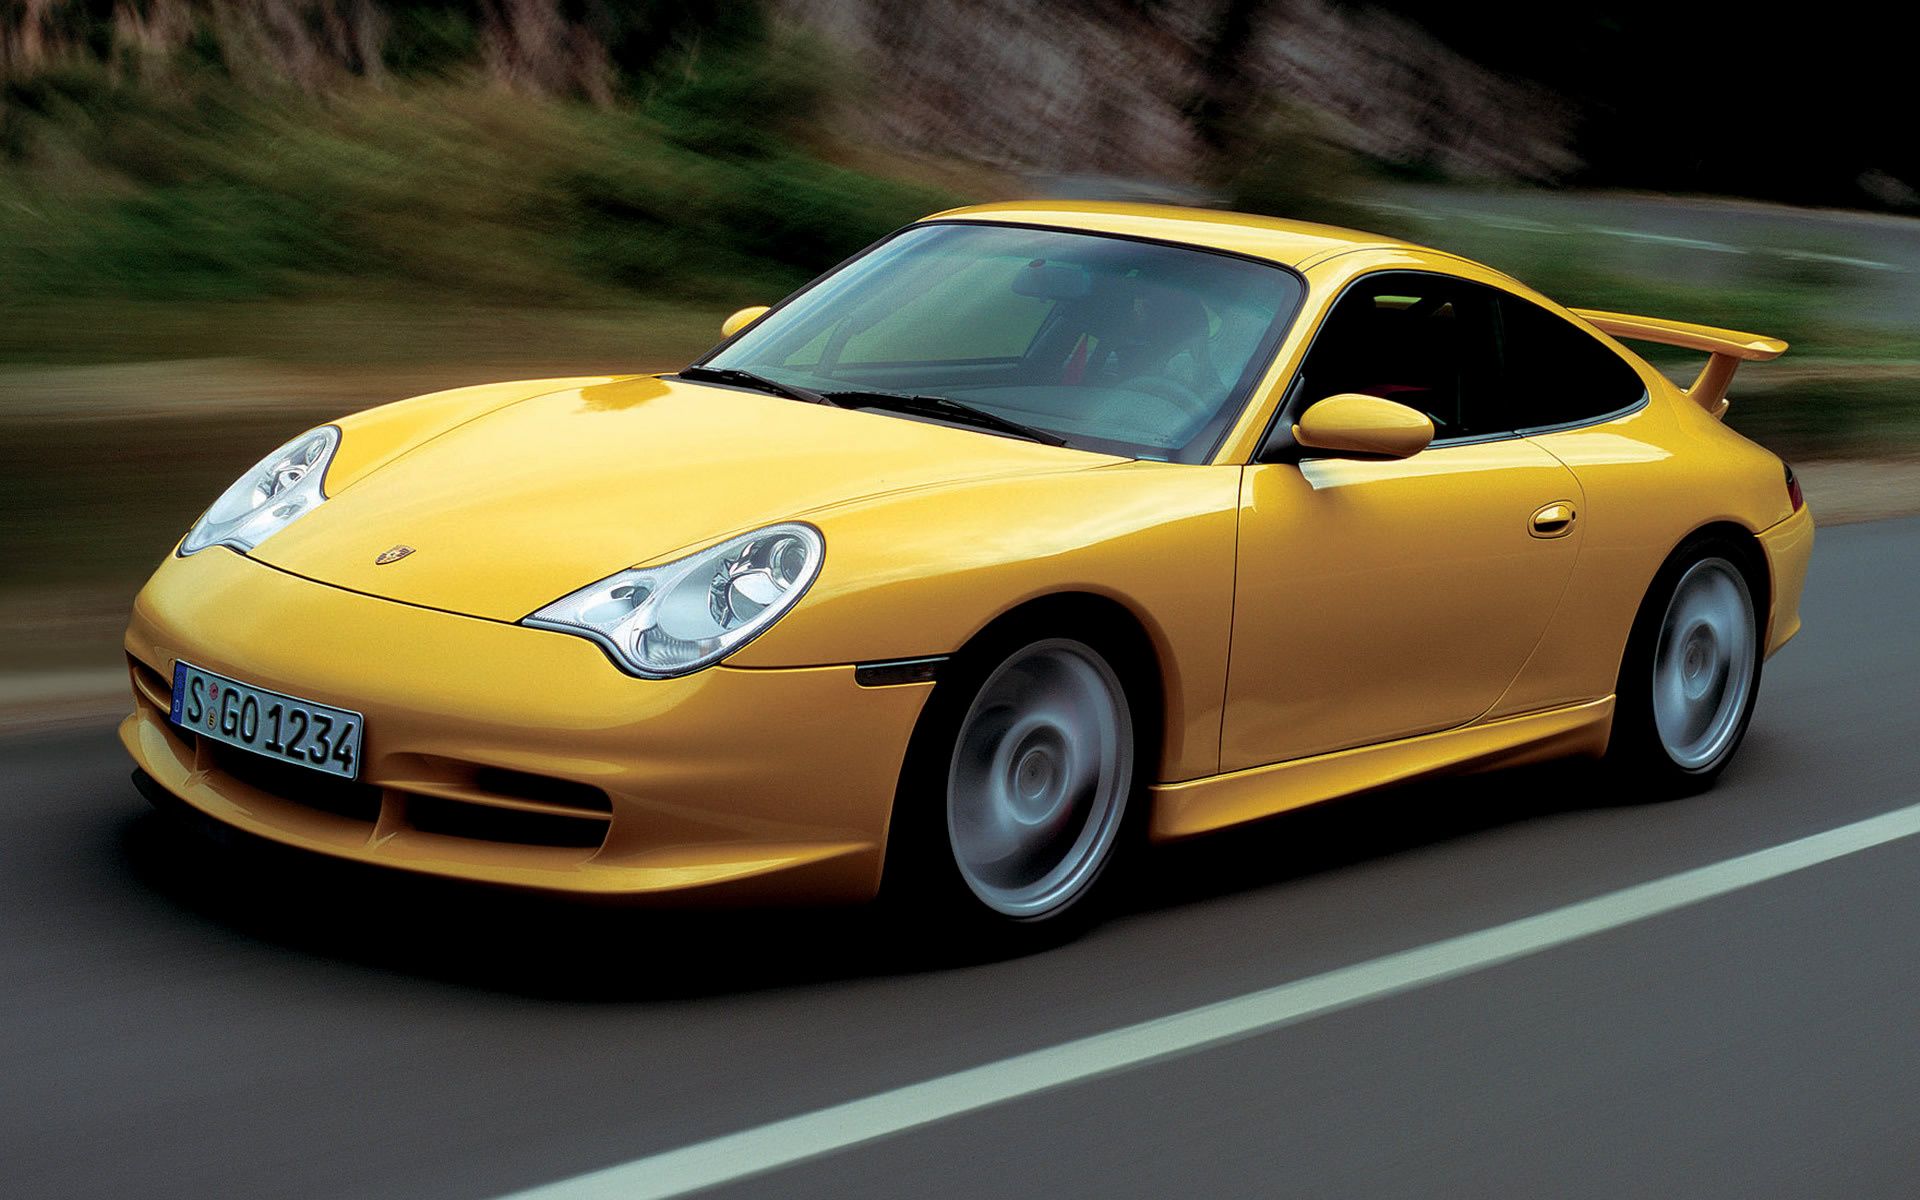 The 2003 Porsche 911 GT3 on the road.